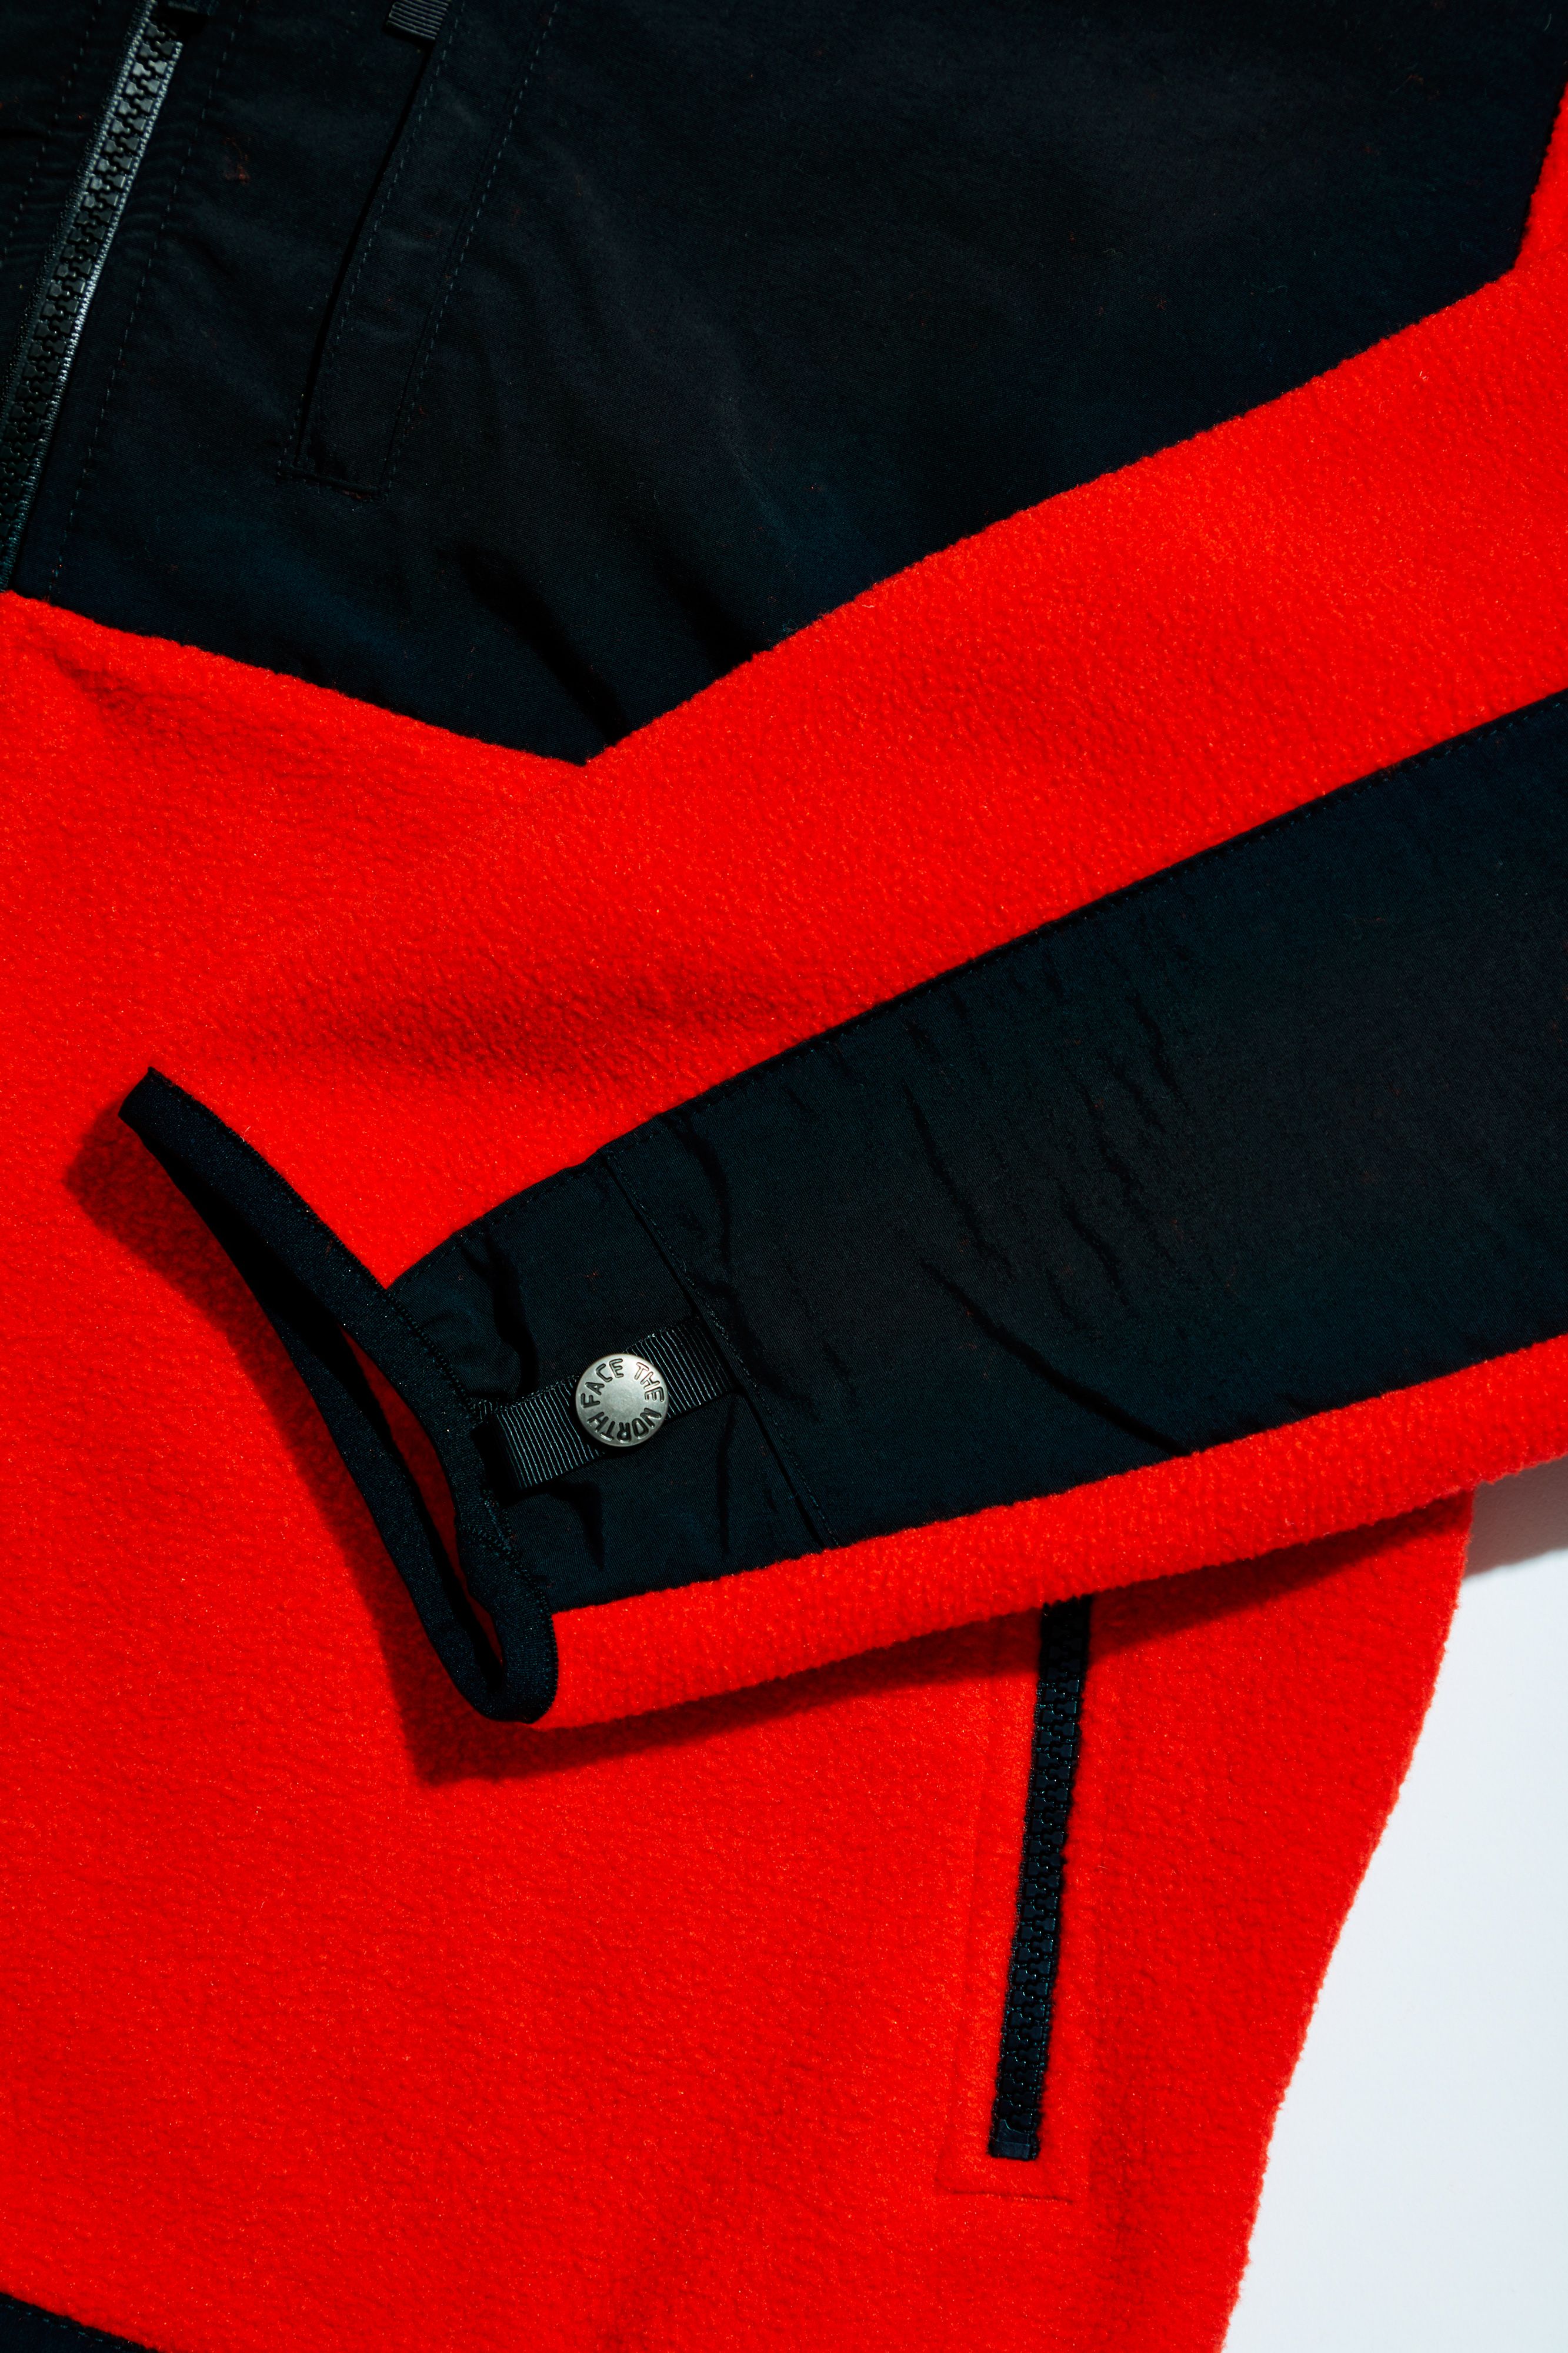 The North Face '95 Retro Denali Jacket Is Its Best yet — Review, Photos